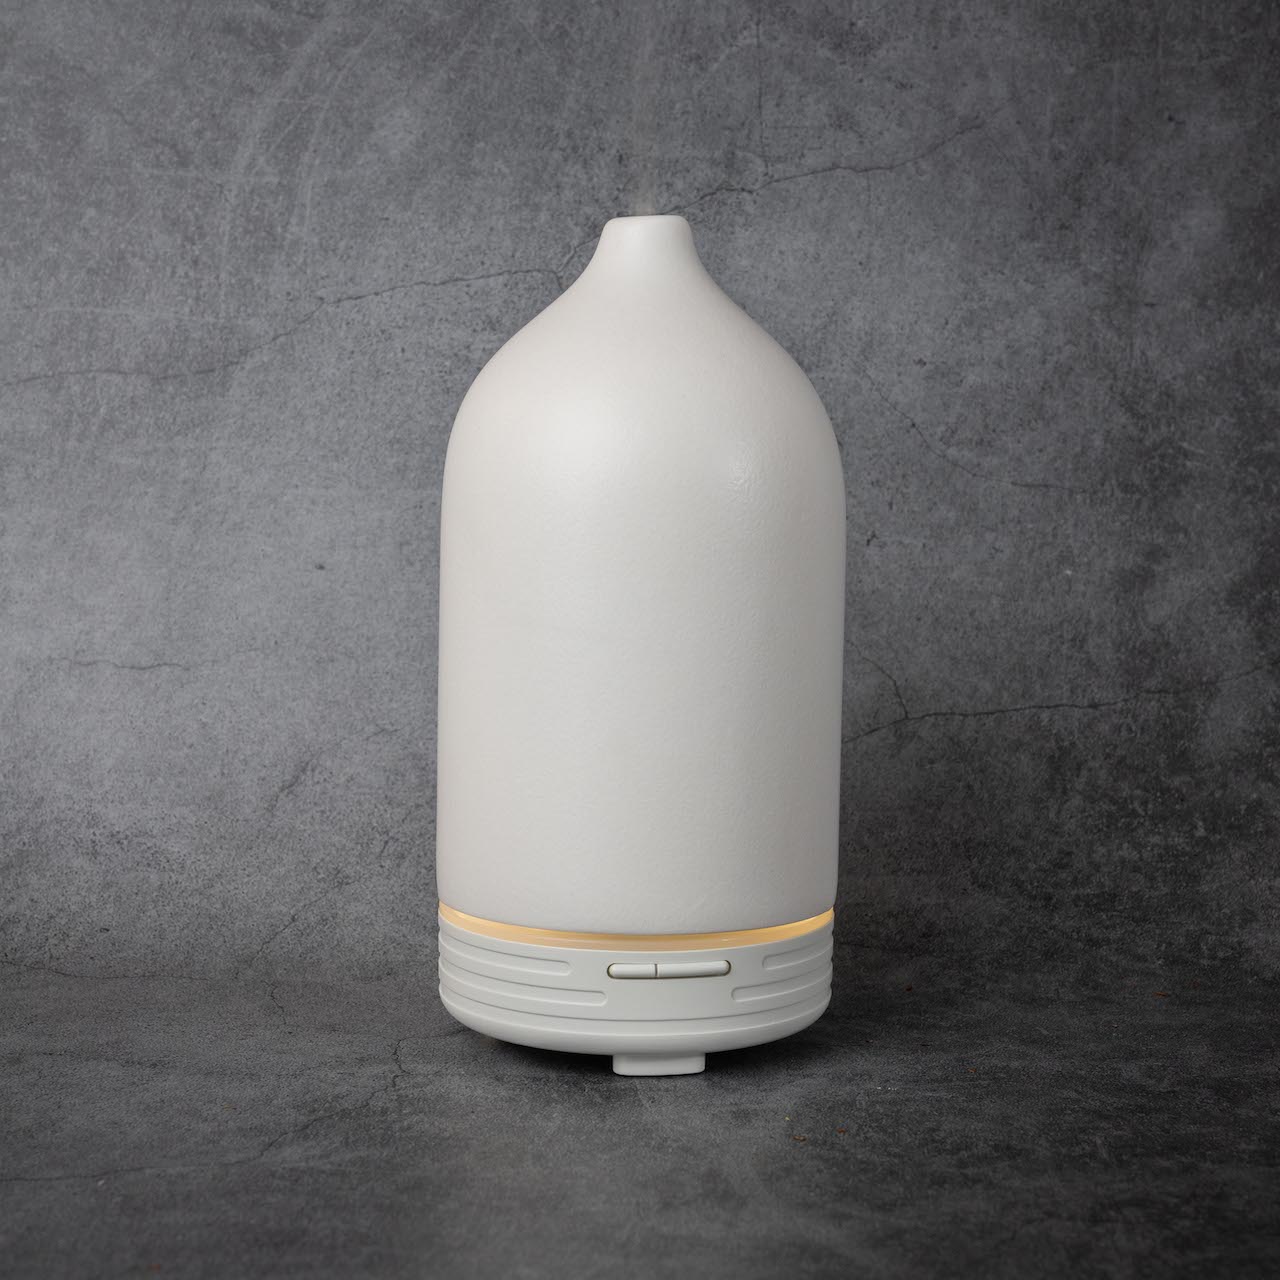 The same white, cone shaped diffuser as in the previous photo, now with power on. There are two small oval shaped buttons near the base of the diffuser, with a thin band above them that is lit up.